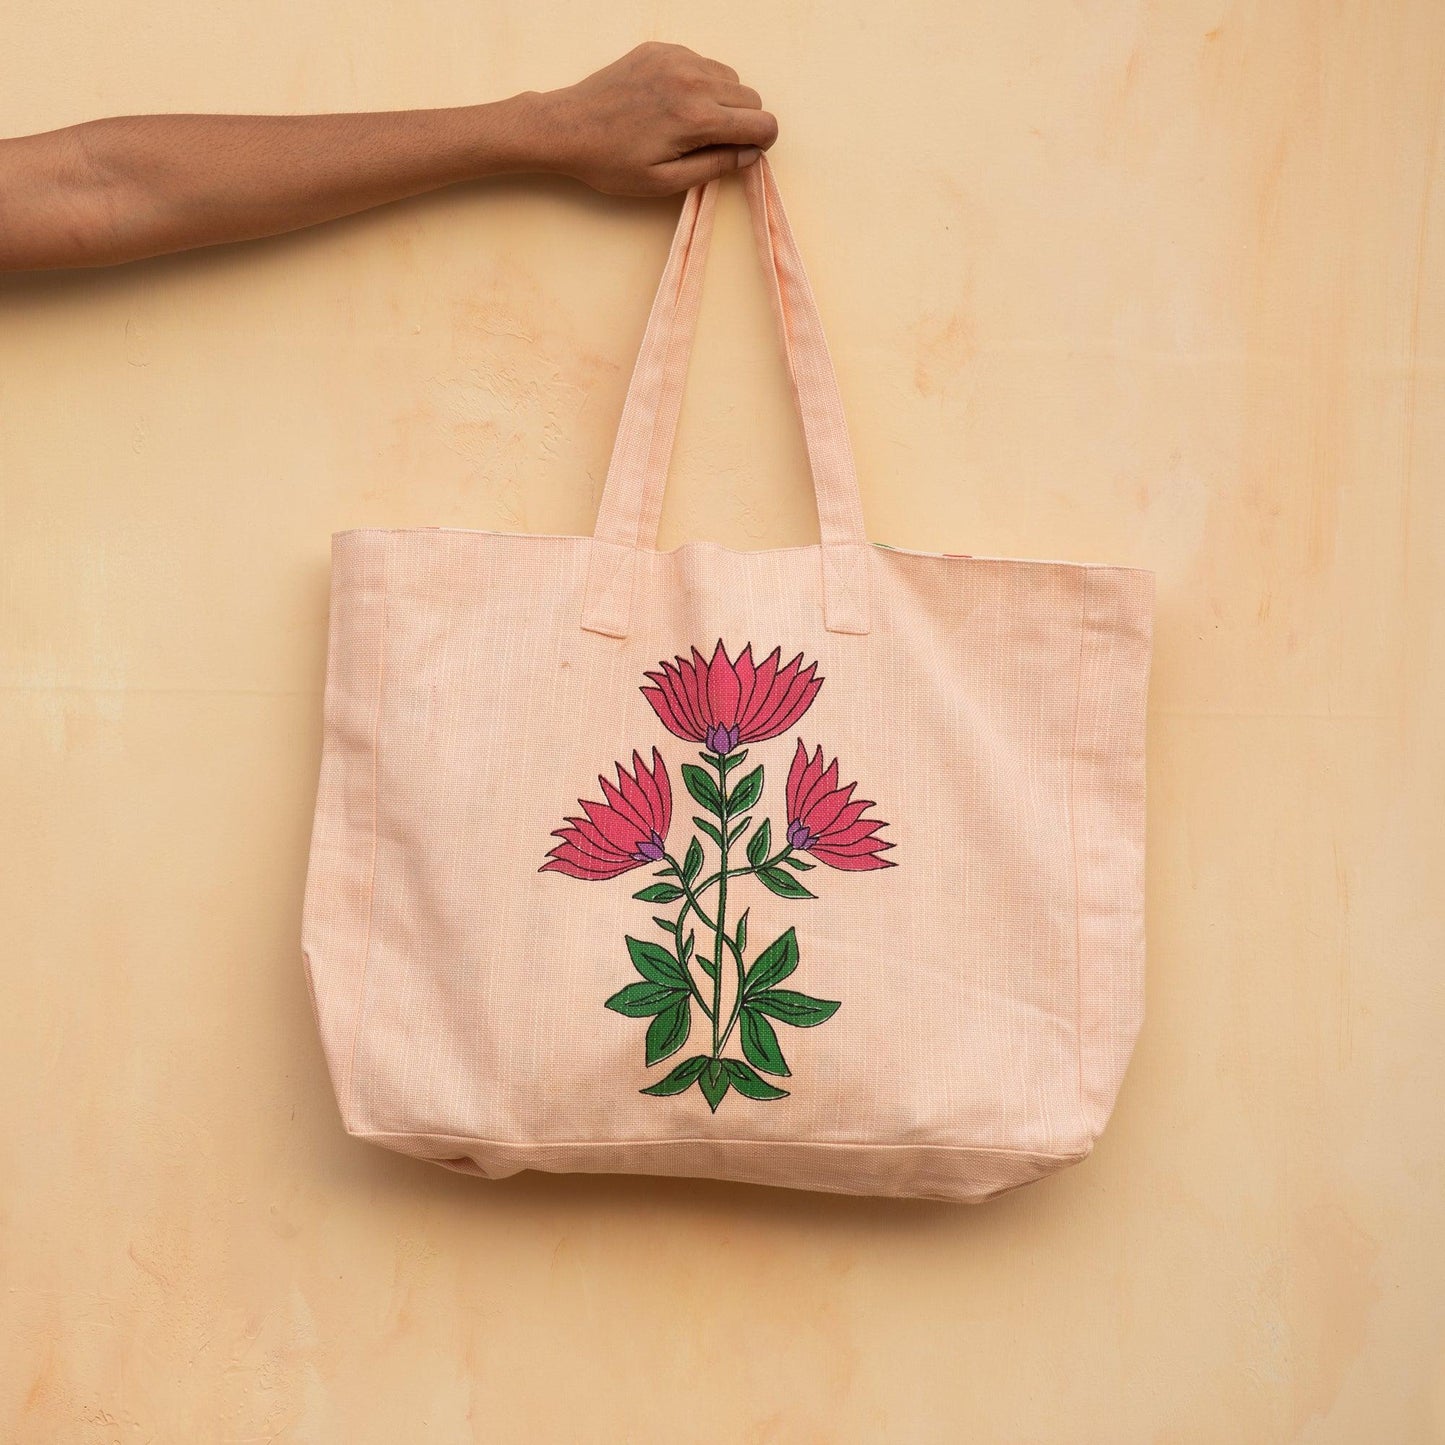 recycled totes bags